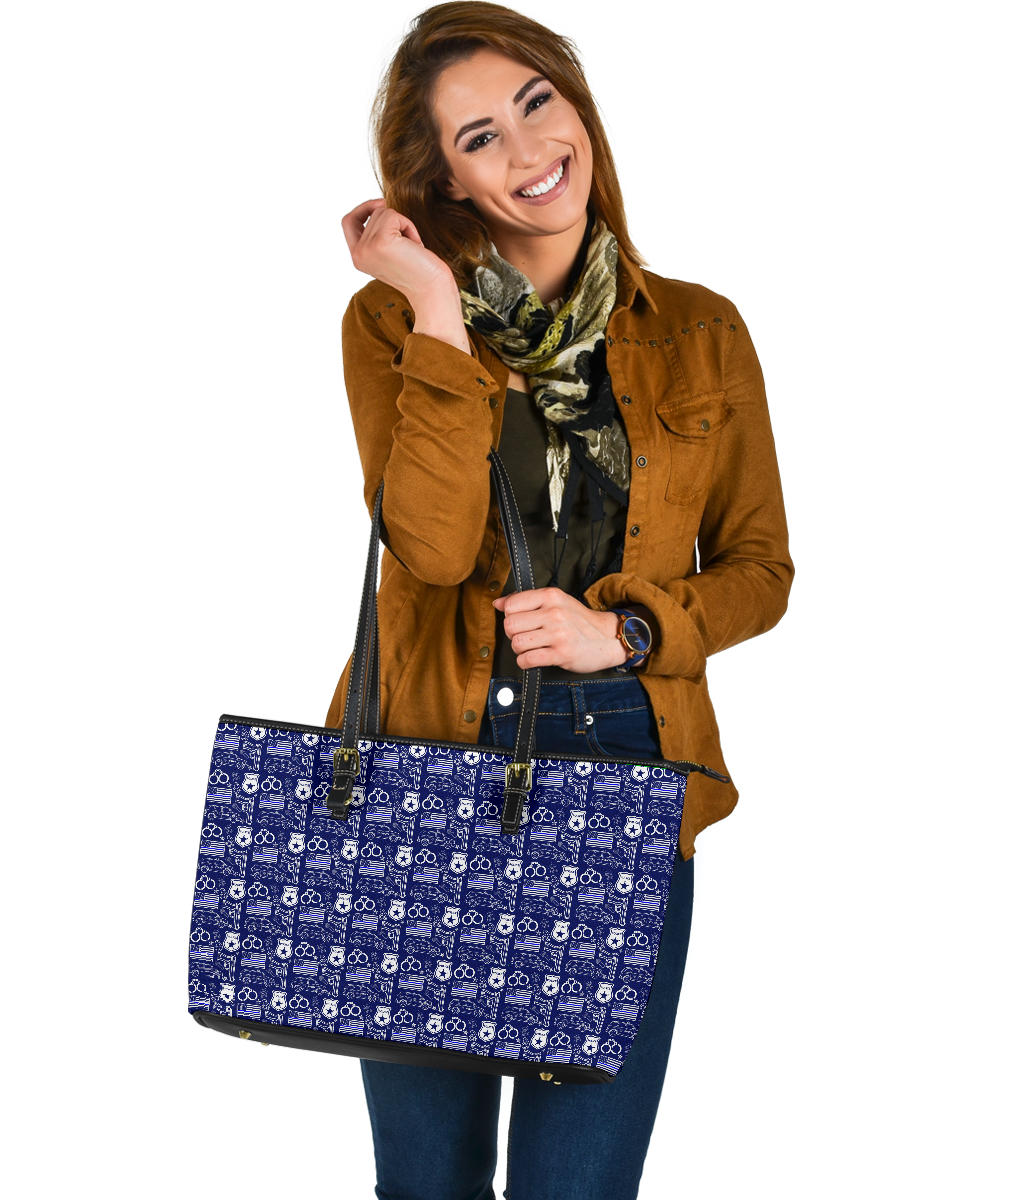 Police Print Back The Blue/White Large PU Faux Leather Tote Bag